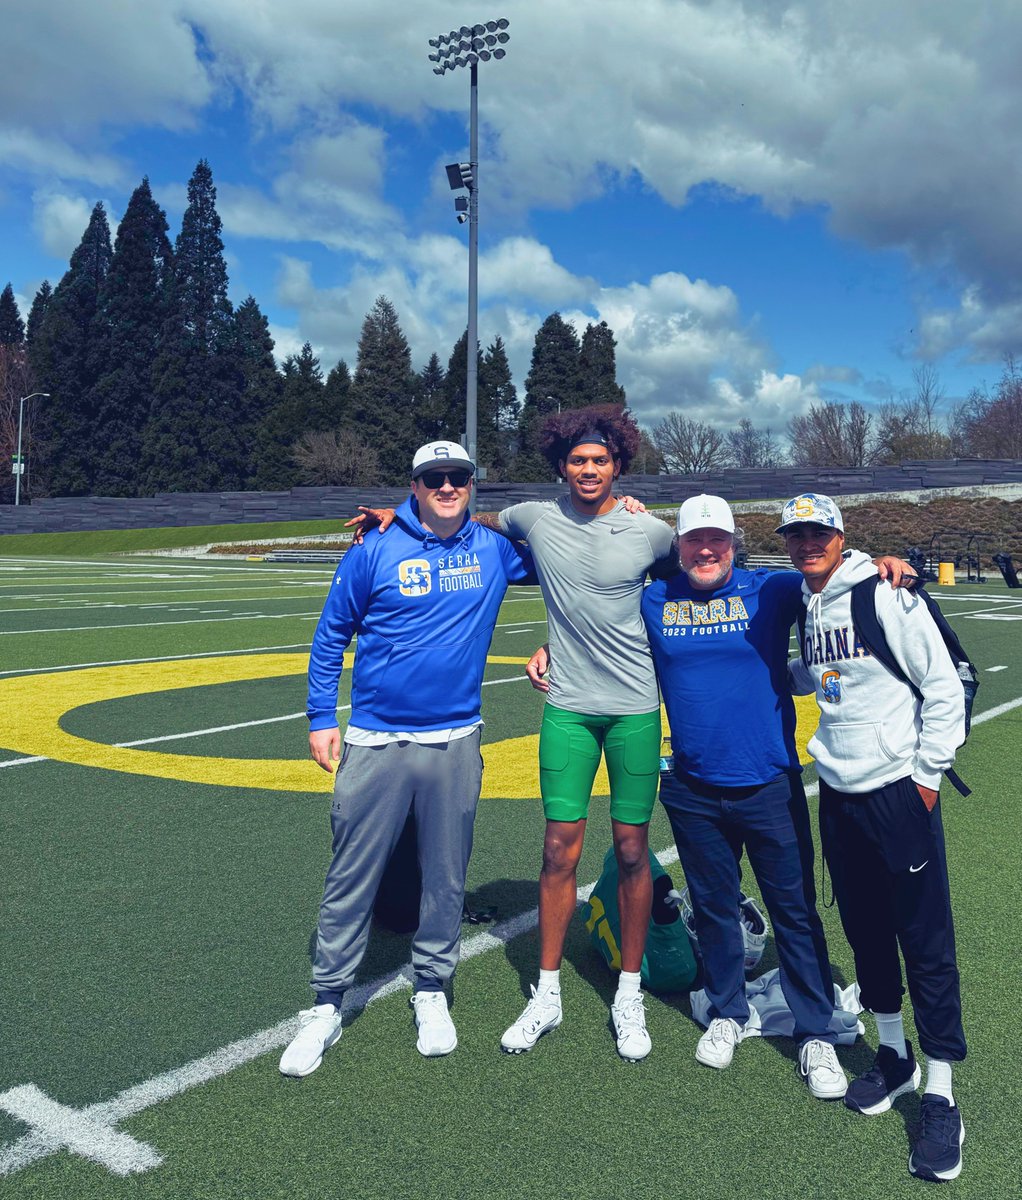 Great week of development for our @PadreFootball_ staff at @Oregonfootball. Thank you to all the Coaches and the entire Organization for their hospitality. Great seeing former Padres @TheRealSione04 and @HisaoBoss at the next level.